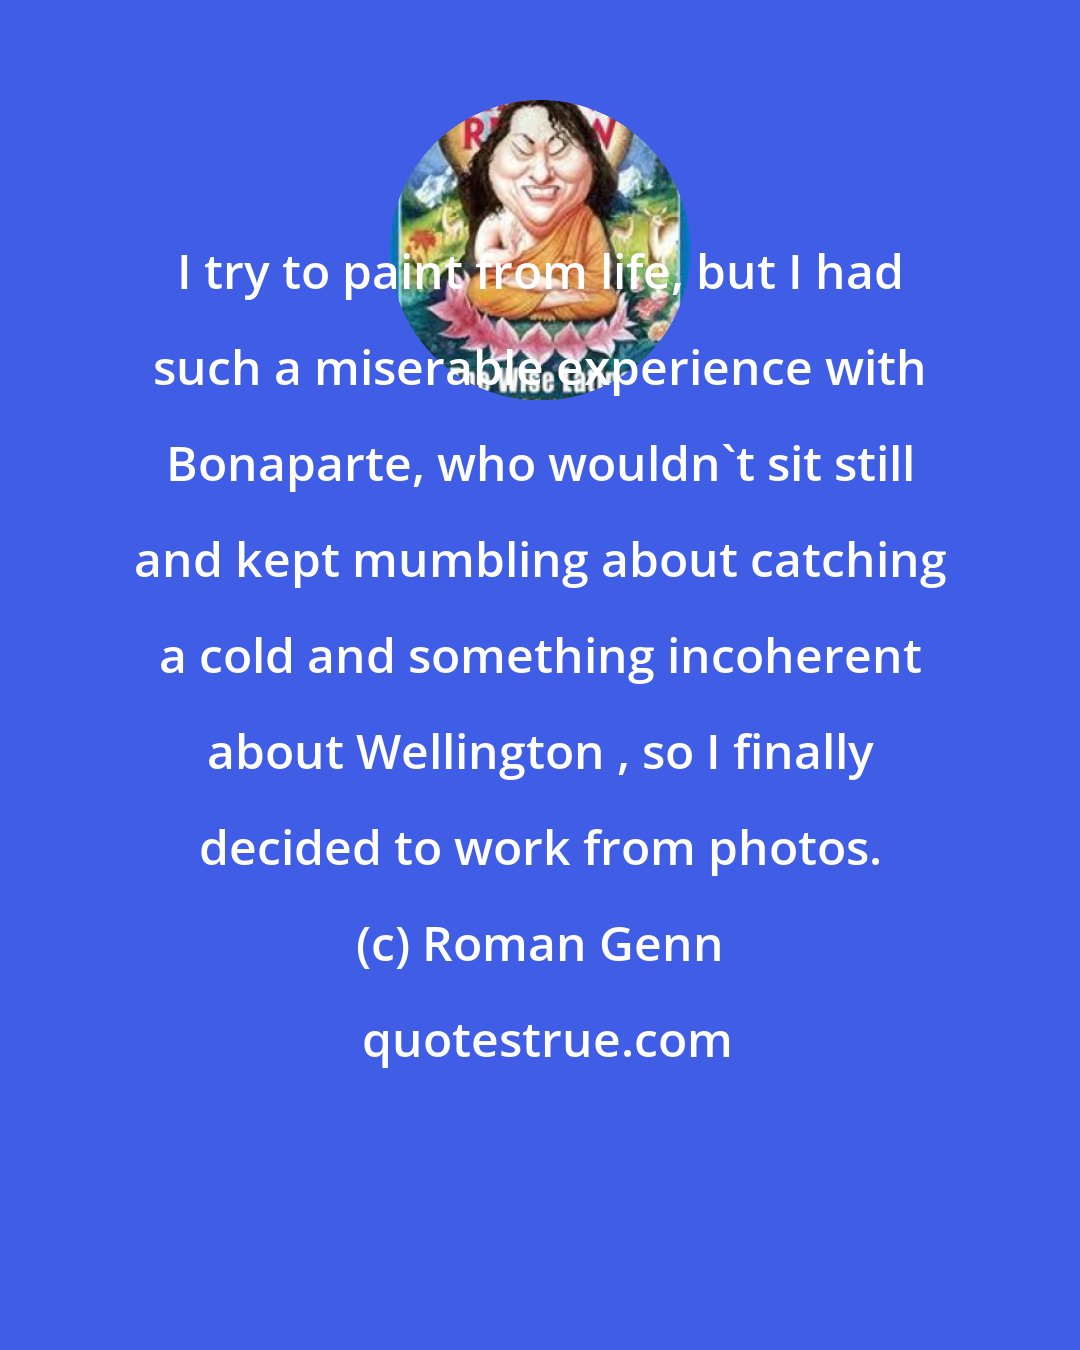 Roman Genn: I try to paint from life, but I had such a miserable experience with Bonaparte, who wouldn't sit still and kept mumbling about catching a cold and something incoherent about Wellington , so I finally decided to work from photos.